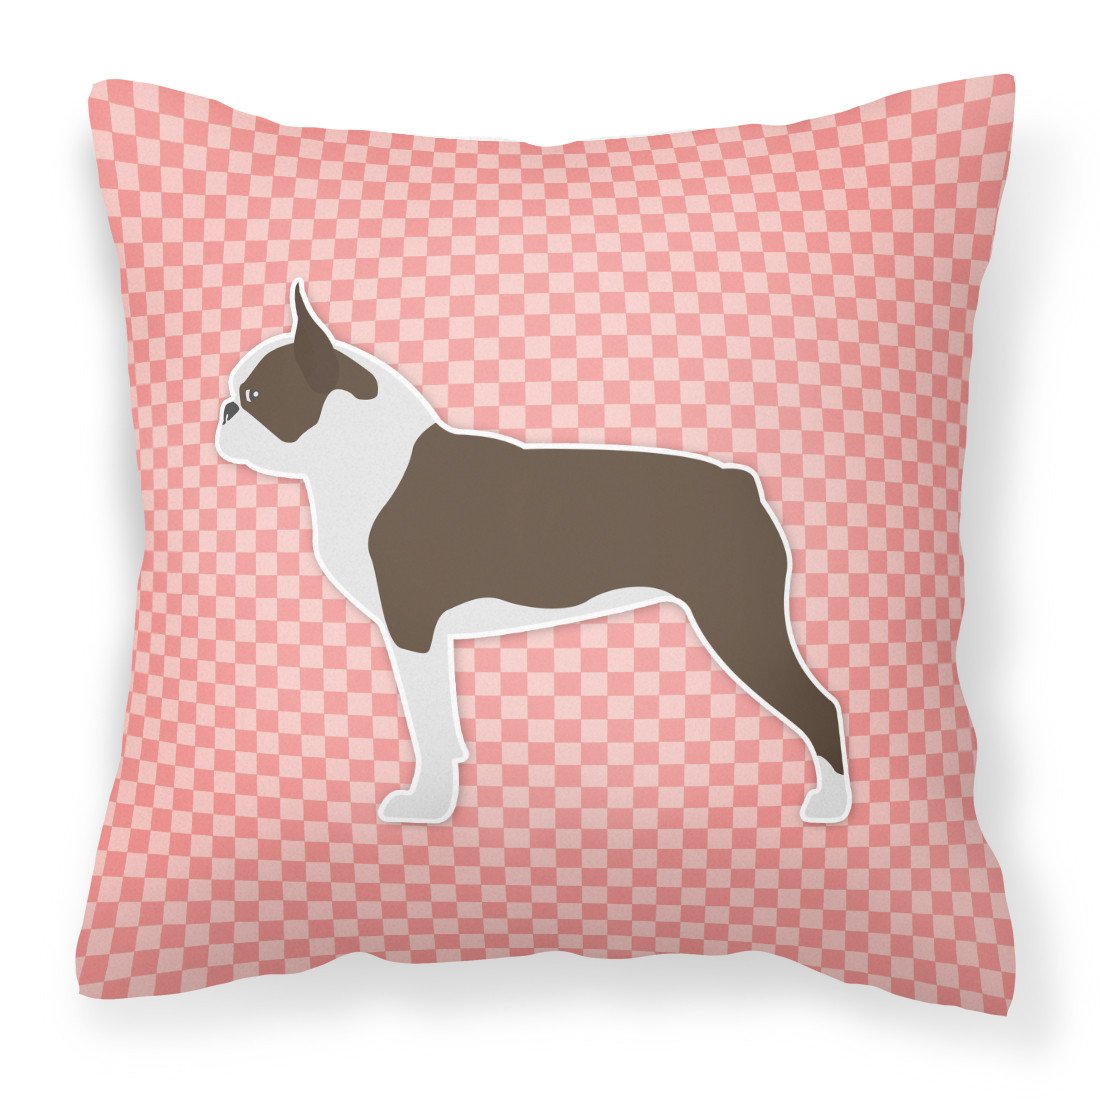 Boston Terrier Checkerboard Pink Fabric Decorative Pillow BB3644PW1818 by Caroline's Treasures